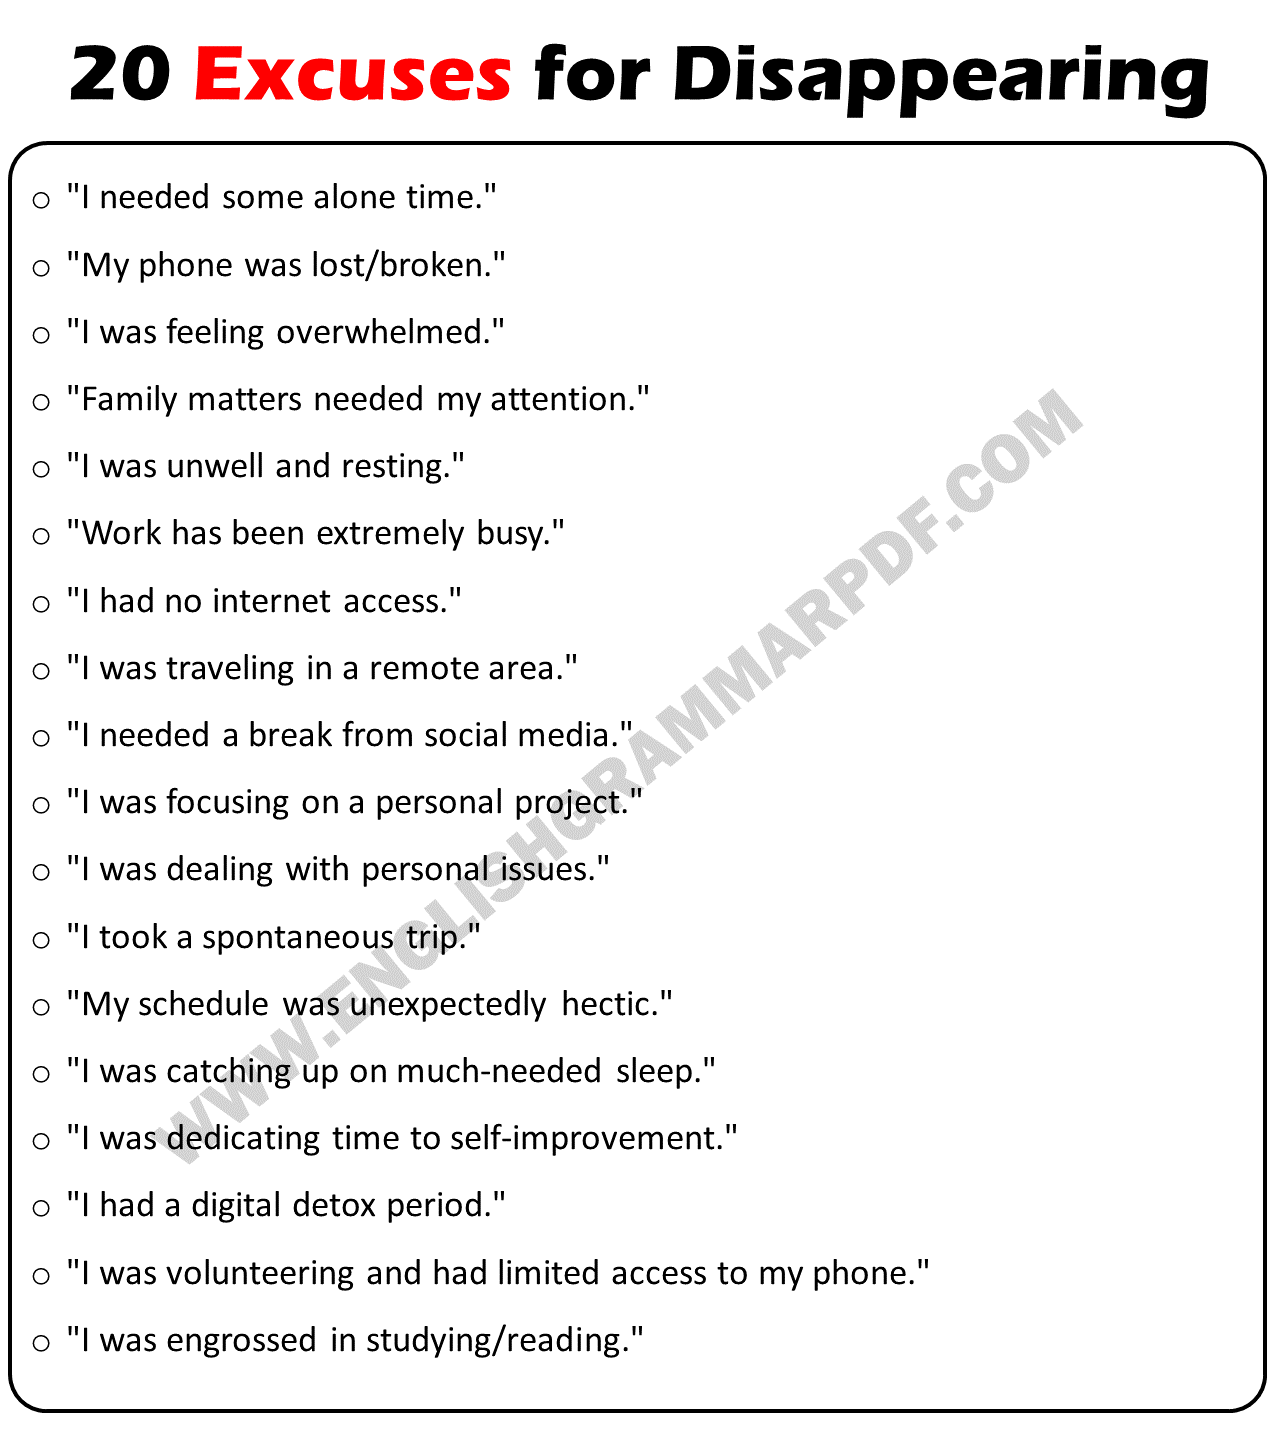 20 Excuses for Disappearing